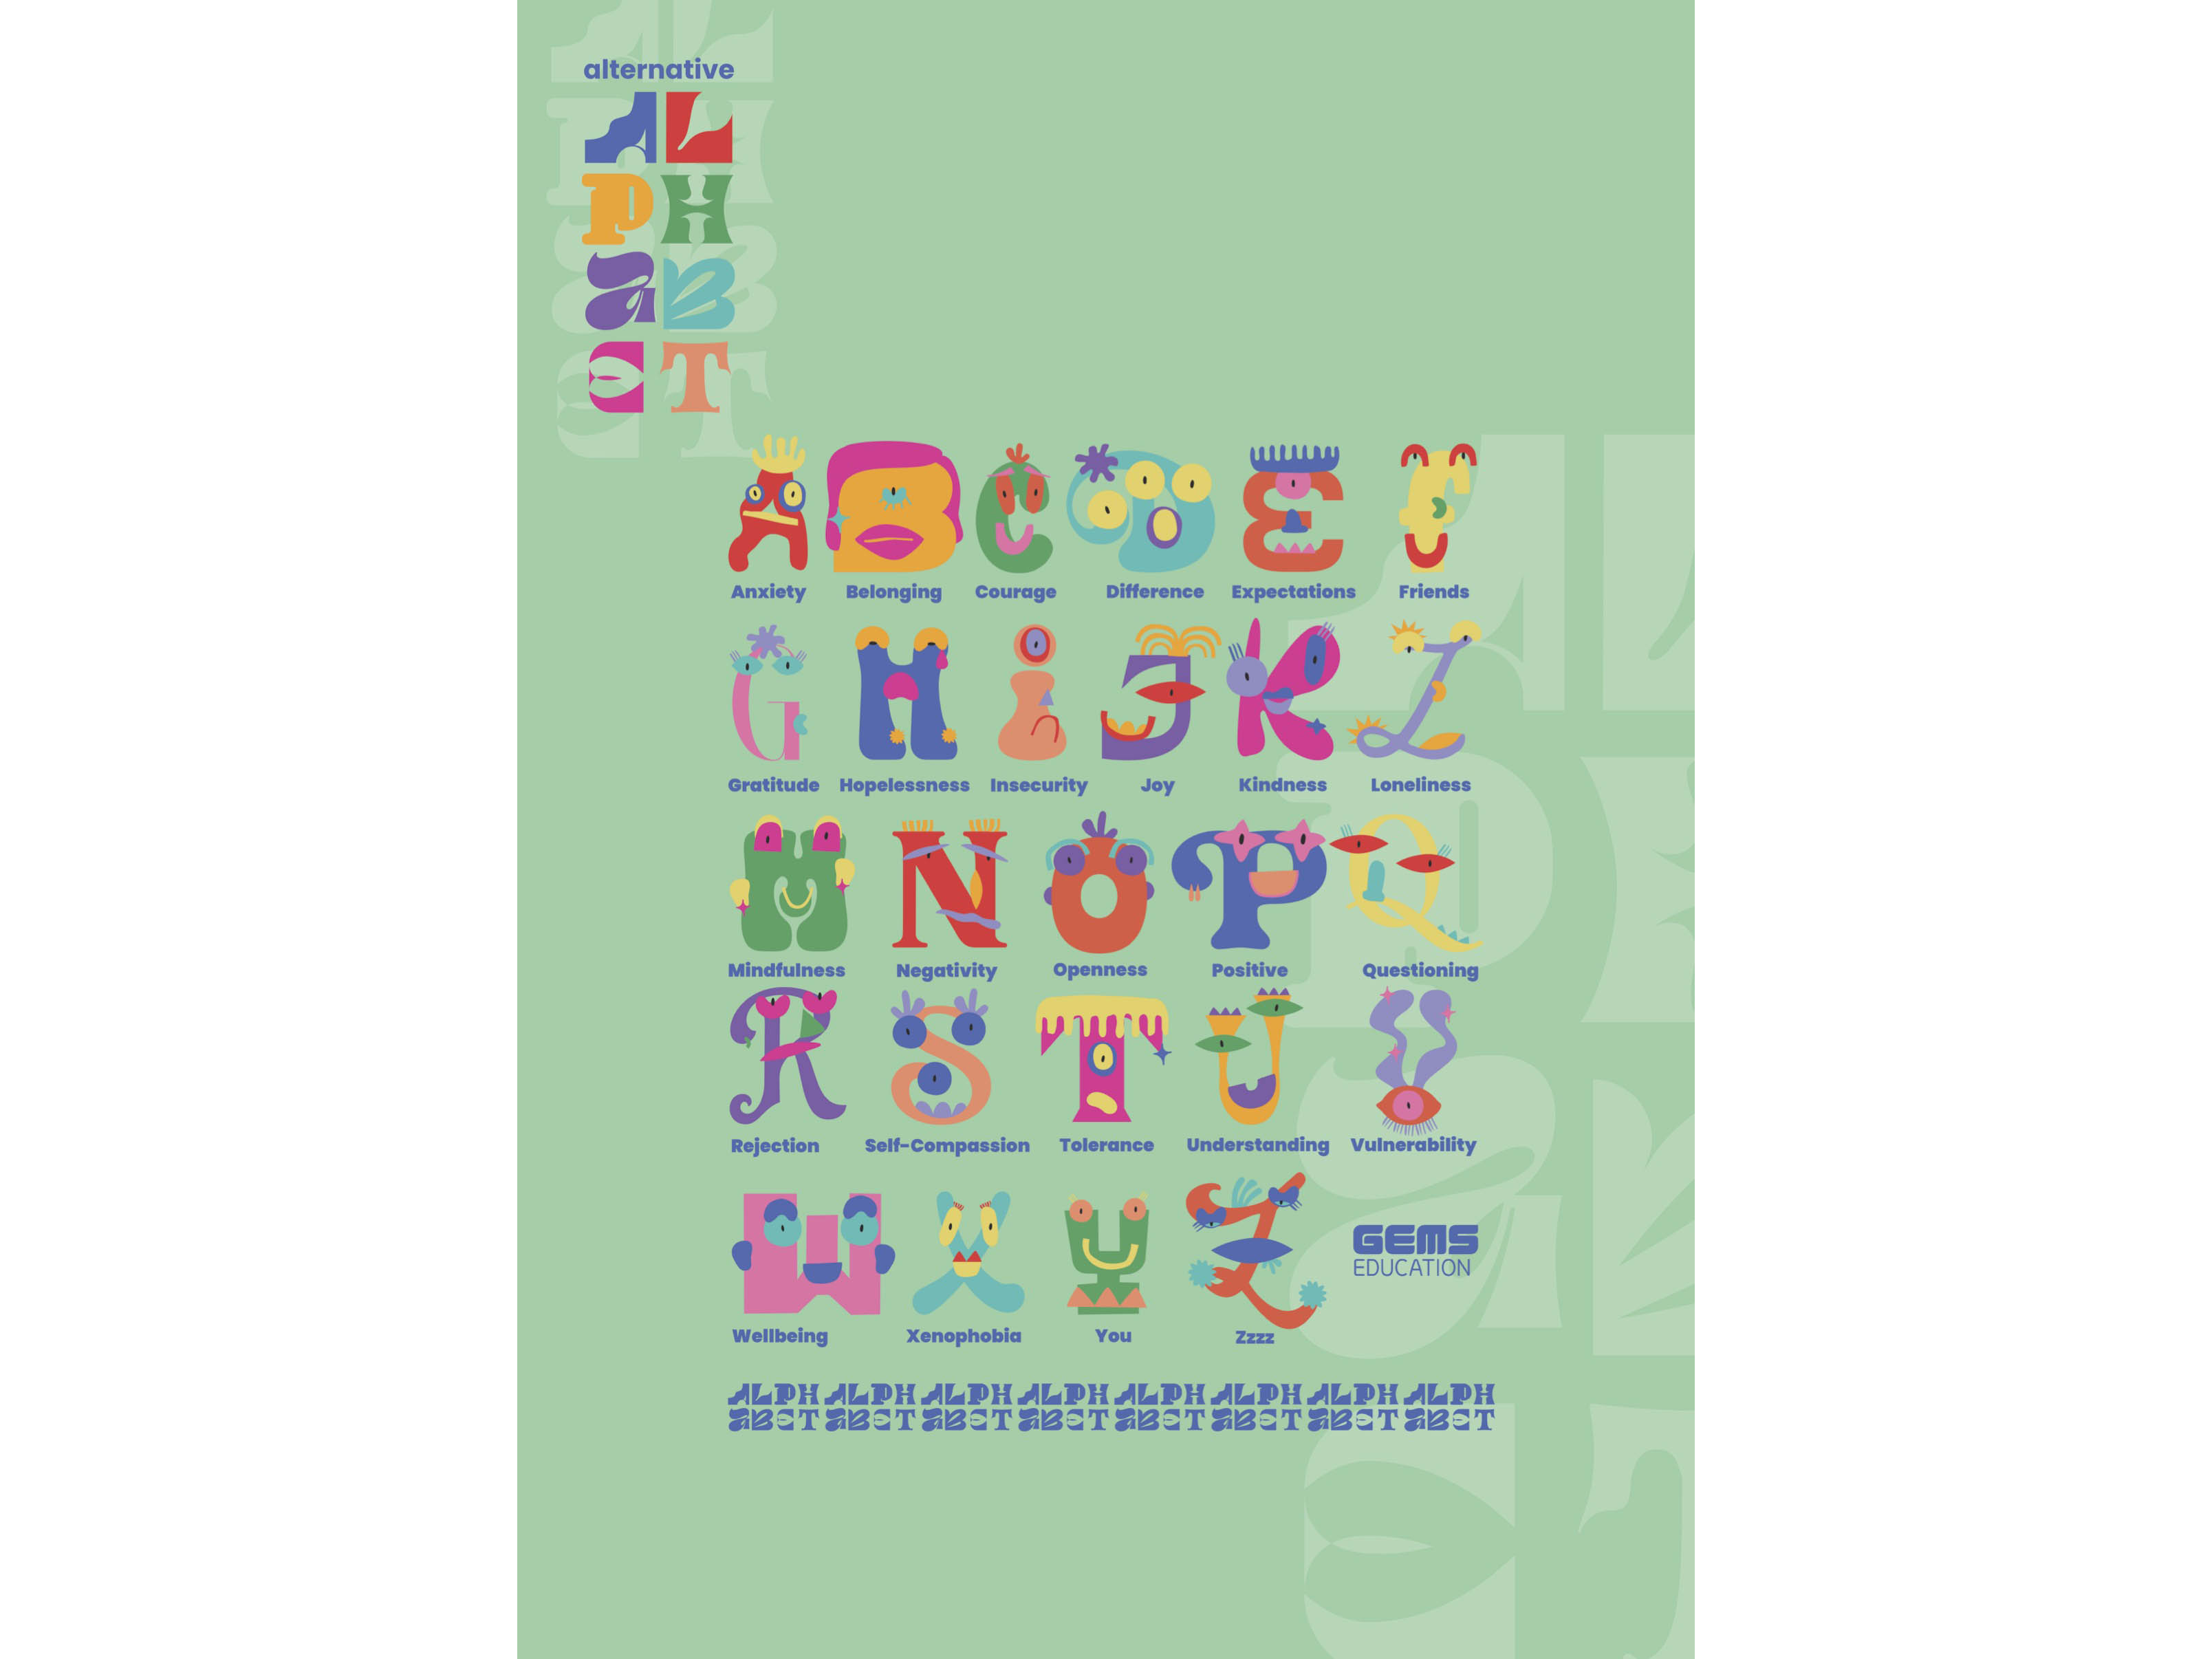 The Alternative Alphabet, an engaging initiative by Memac Ogivly and GEMS Education to address mental health in youth